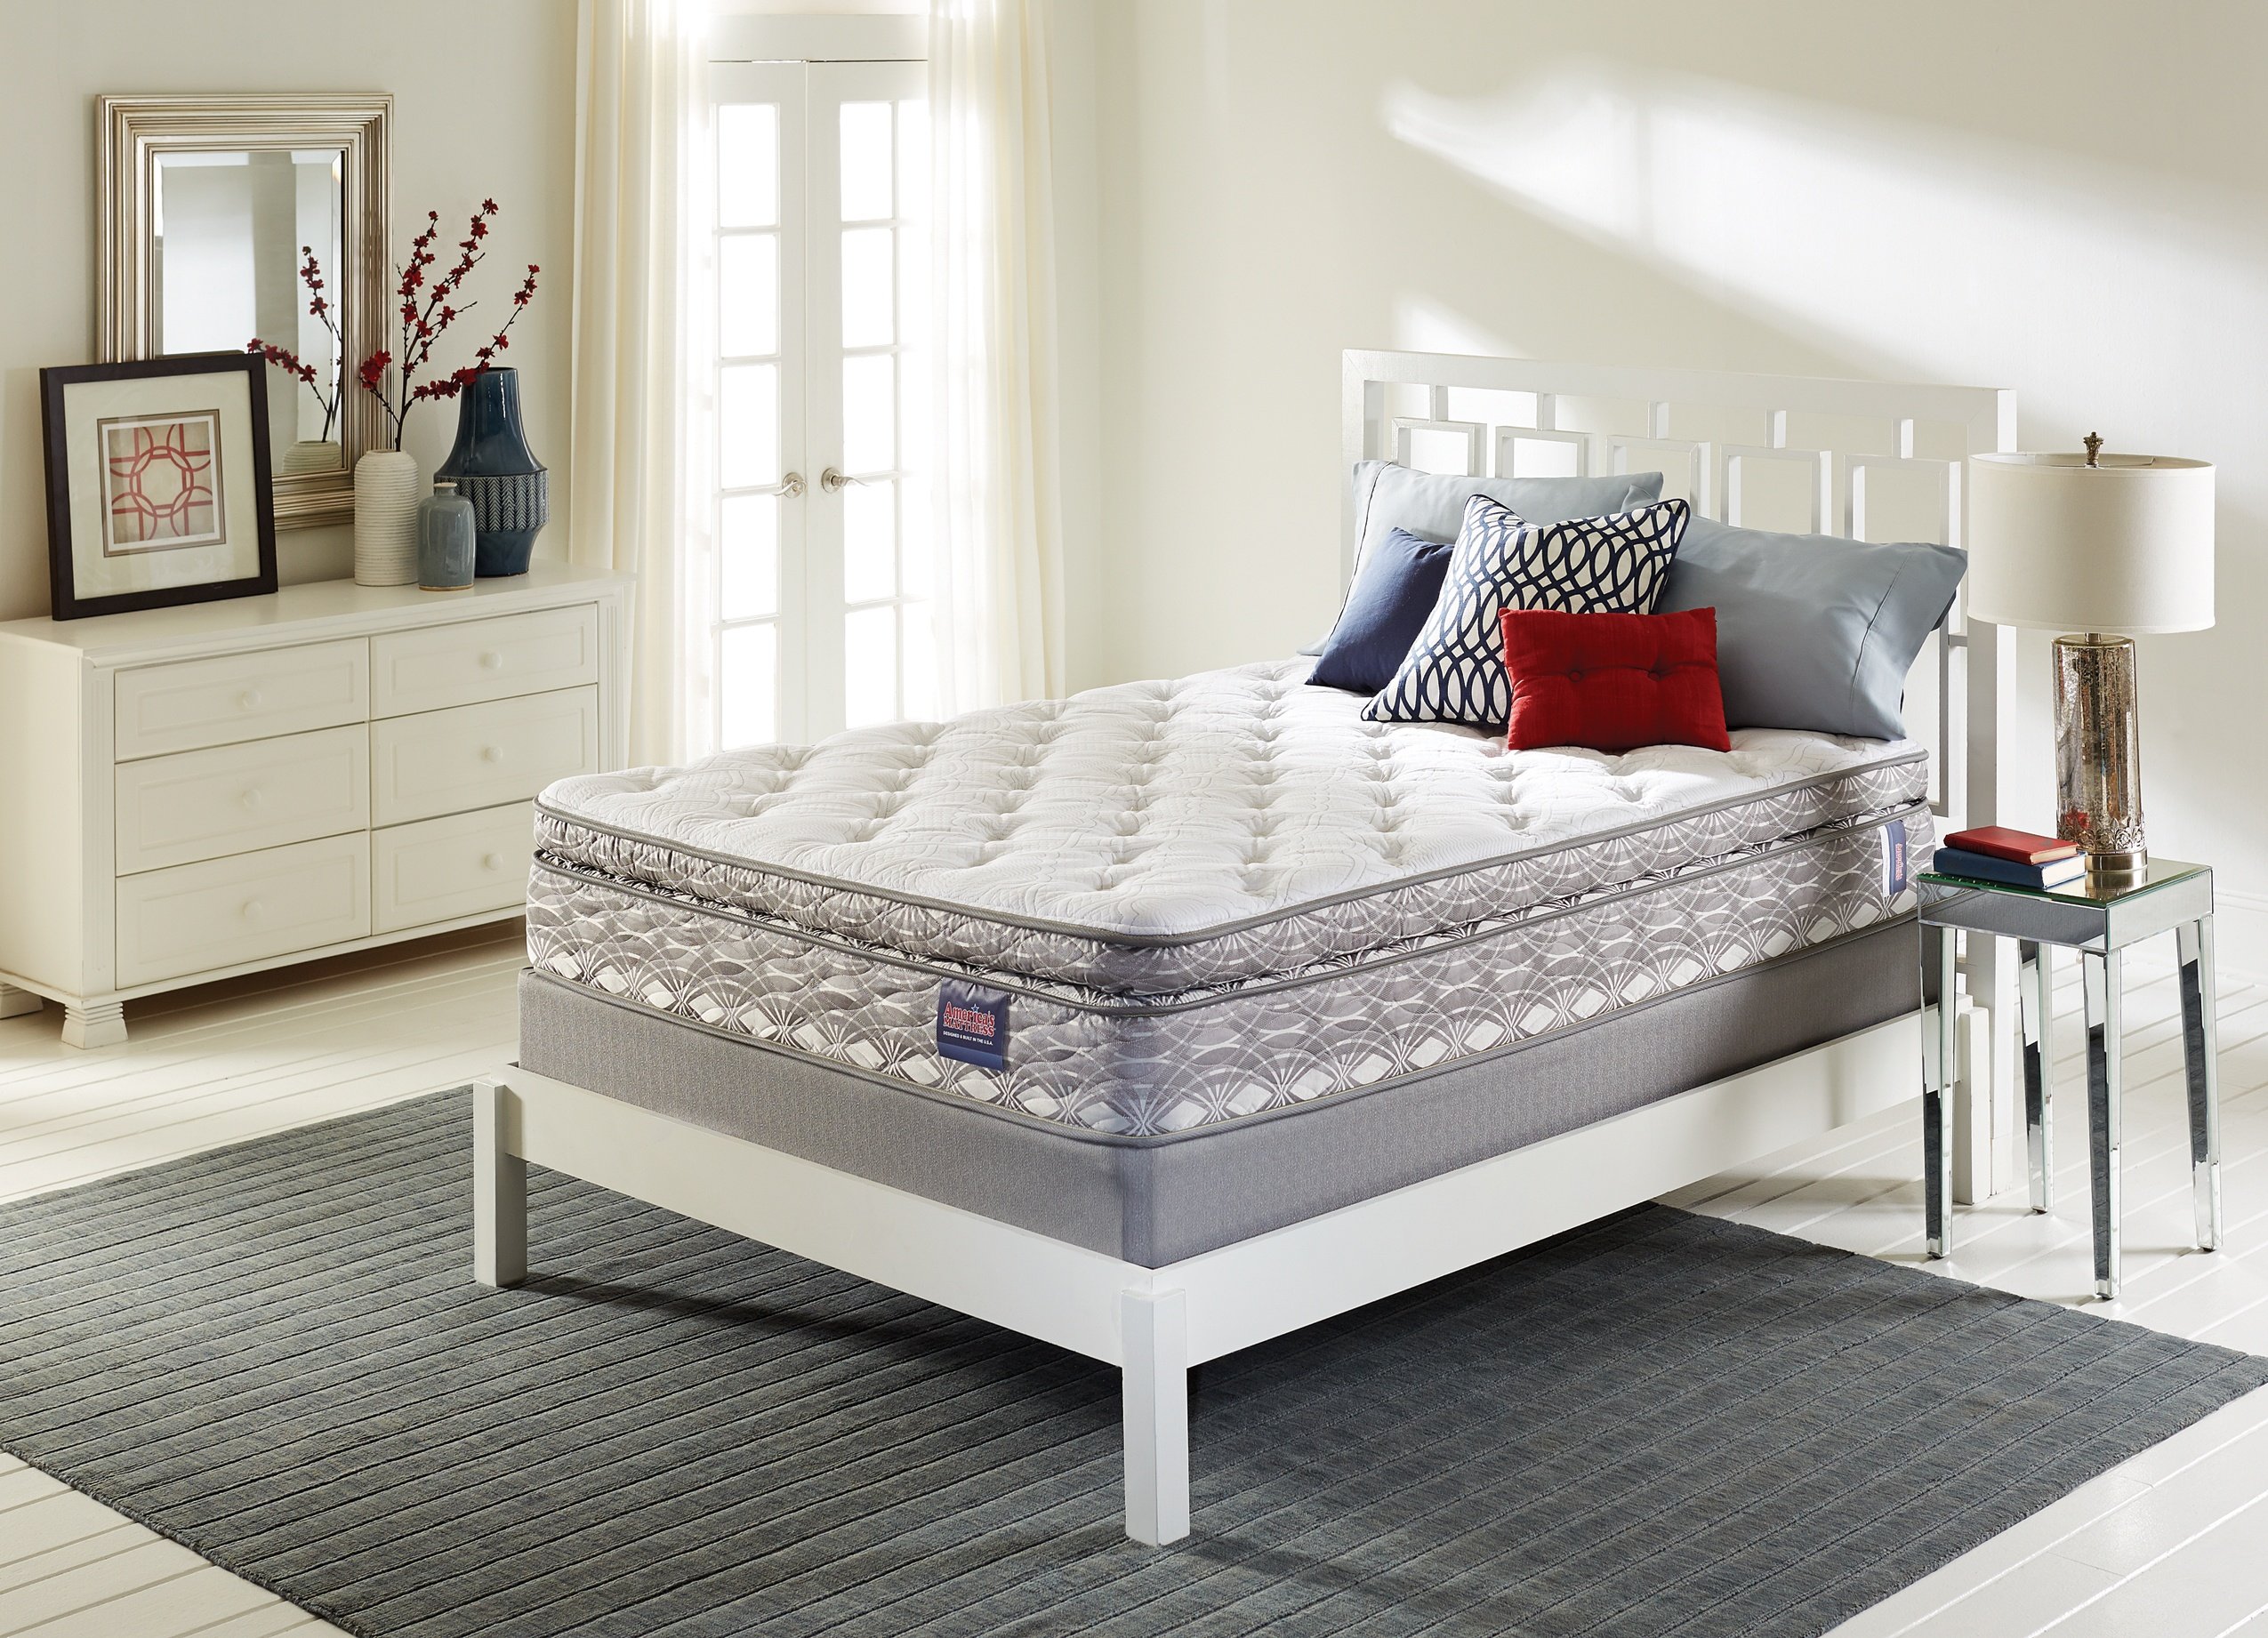 What you Need to Know About Bed Frames